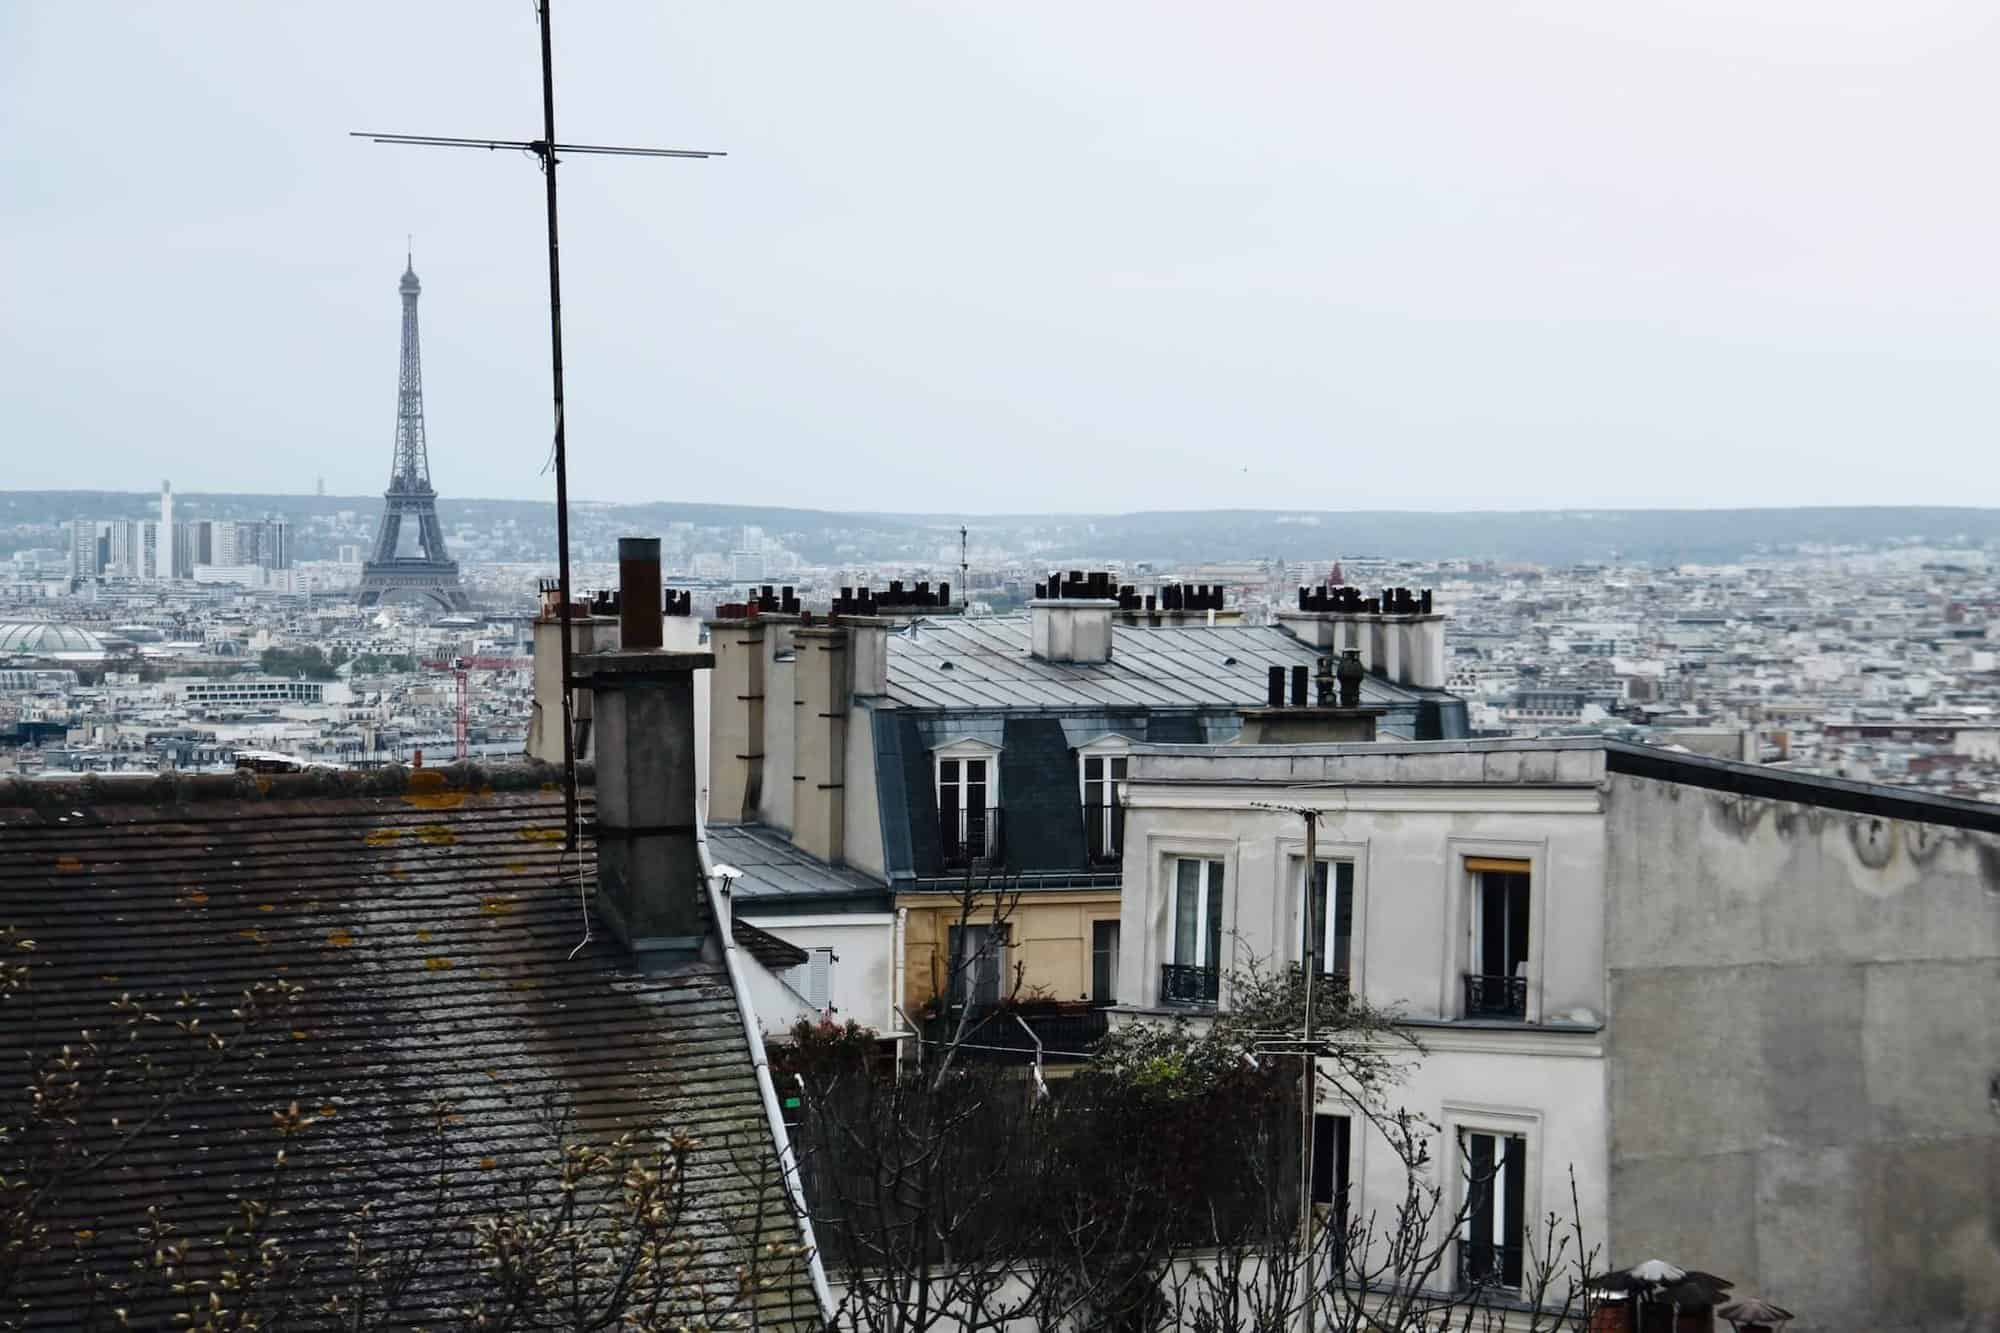 A Parisian skyline. There are several Parisian rooftops visible as well as the Eiffel Tower. The sky is gray as well as the buildings and rooftops.